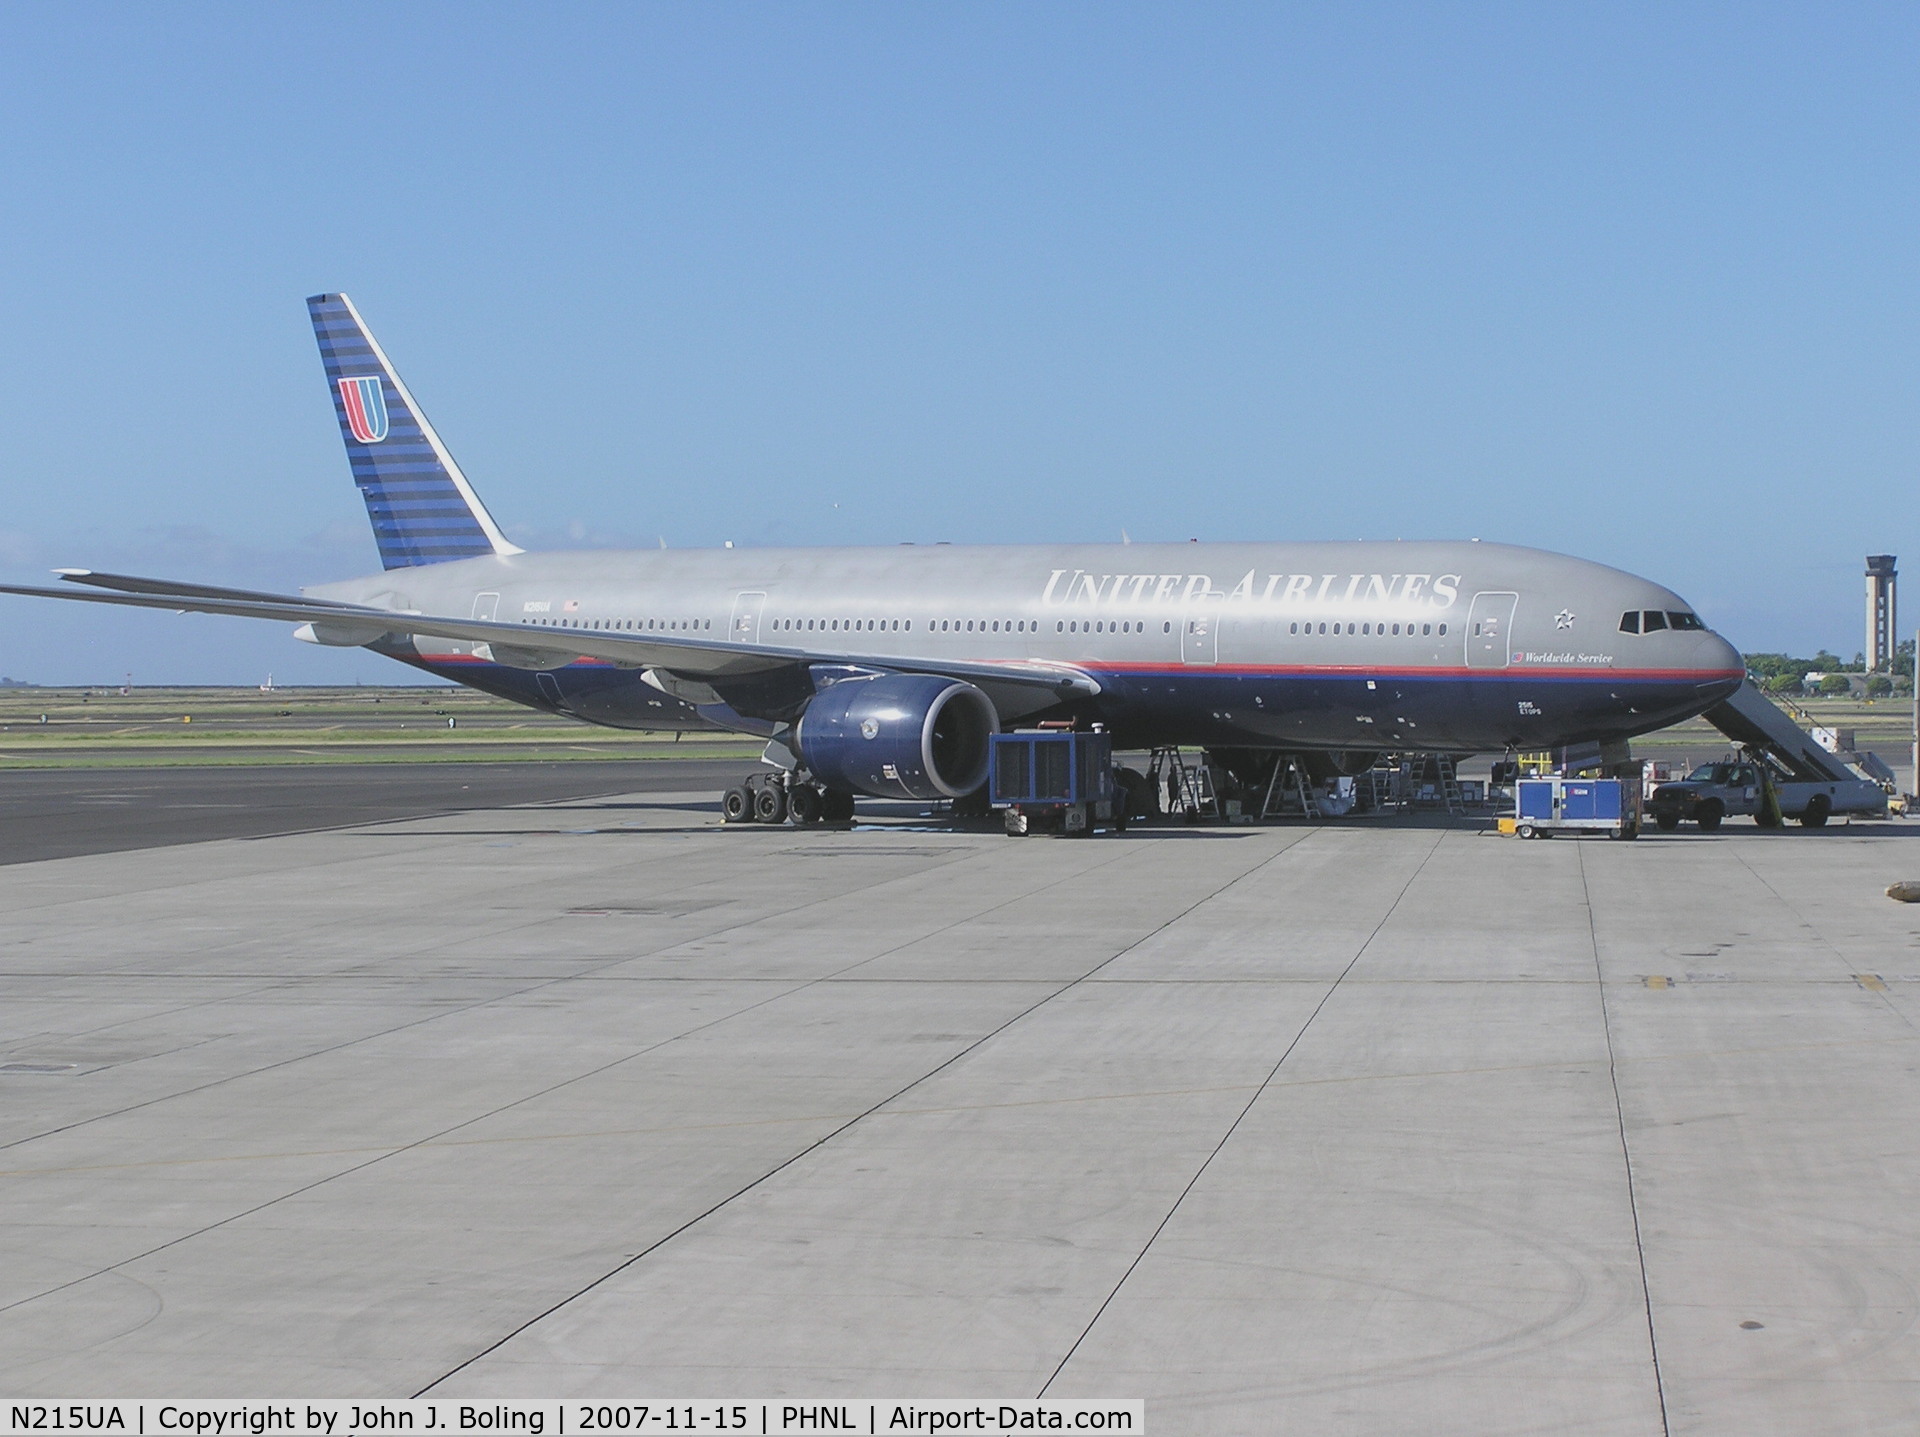 N215UA, 2000 Boeing 777-222 C/N 30221, UAL 777 on ramp at Honolulu. Maint pers are changing left engine.